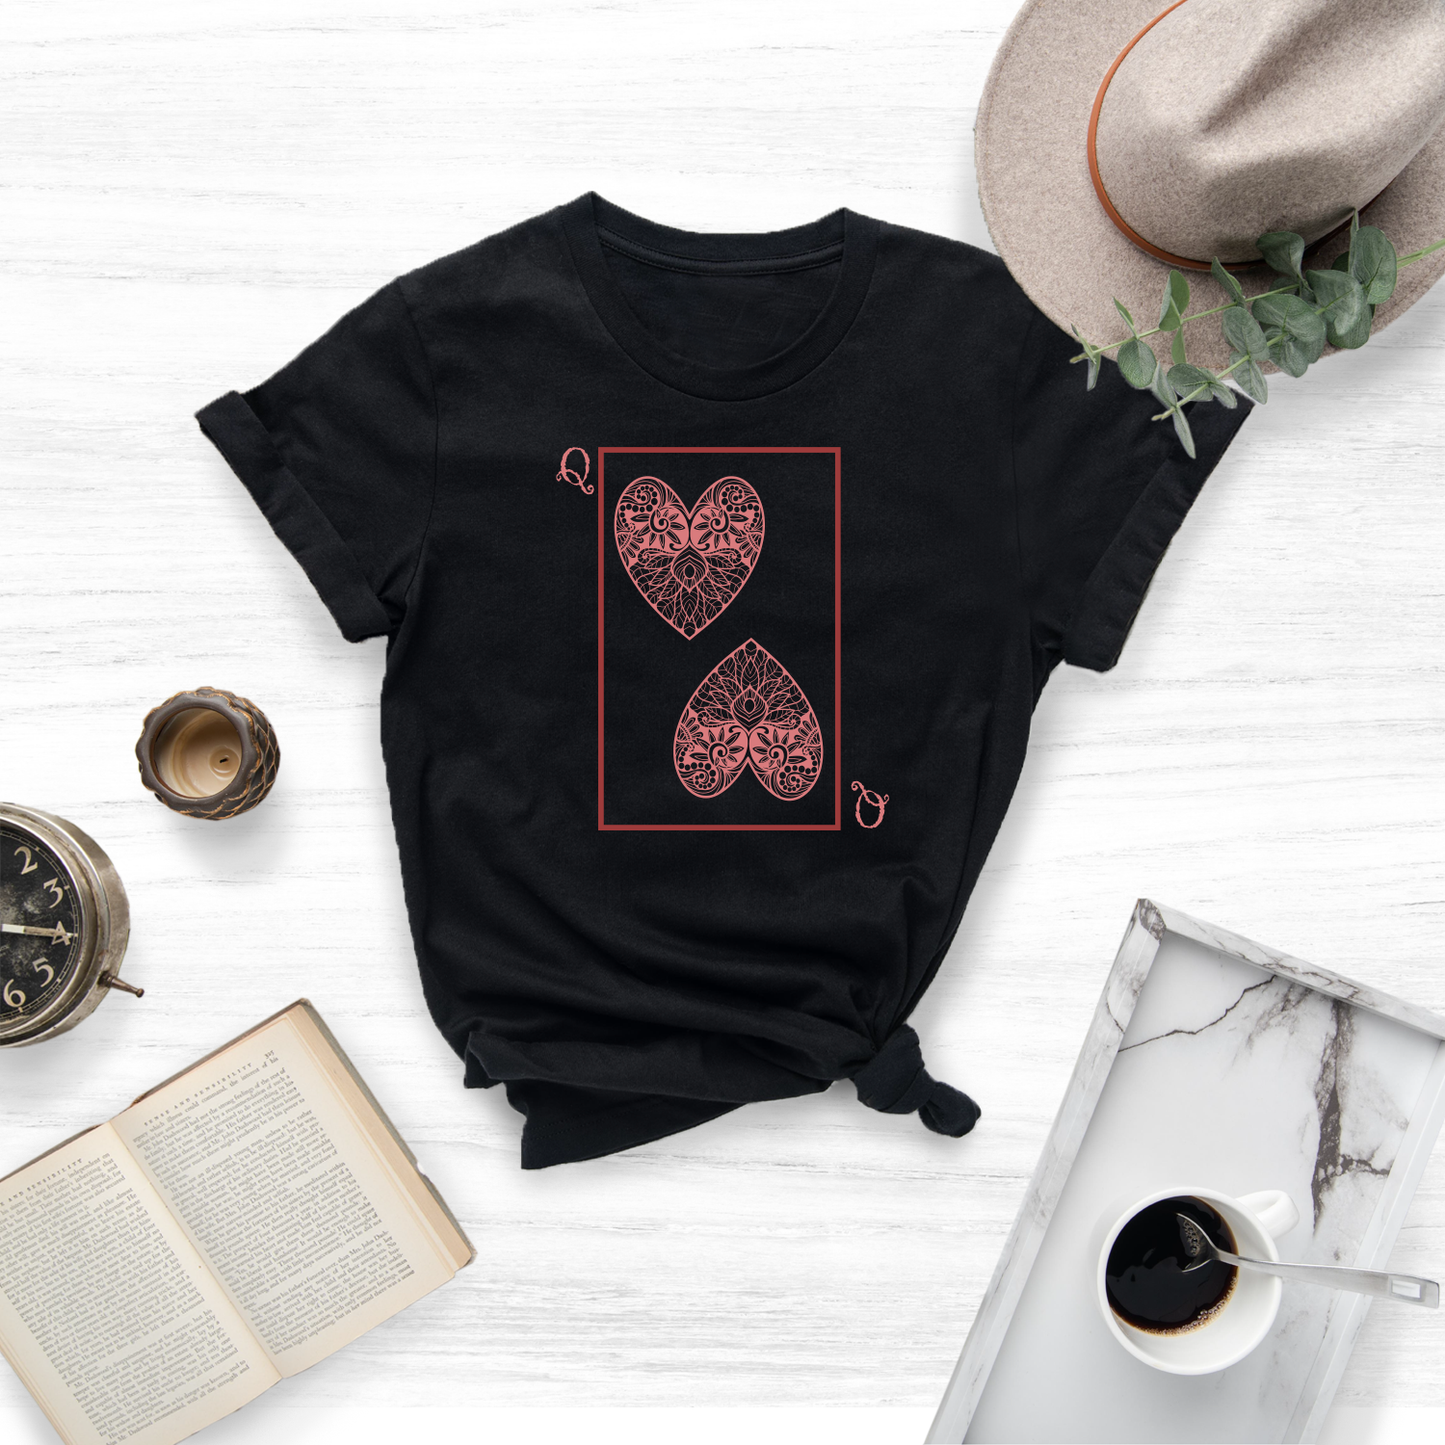 Embrace your queenly spirit and celebrate with this unique Queen of Hearts tee.